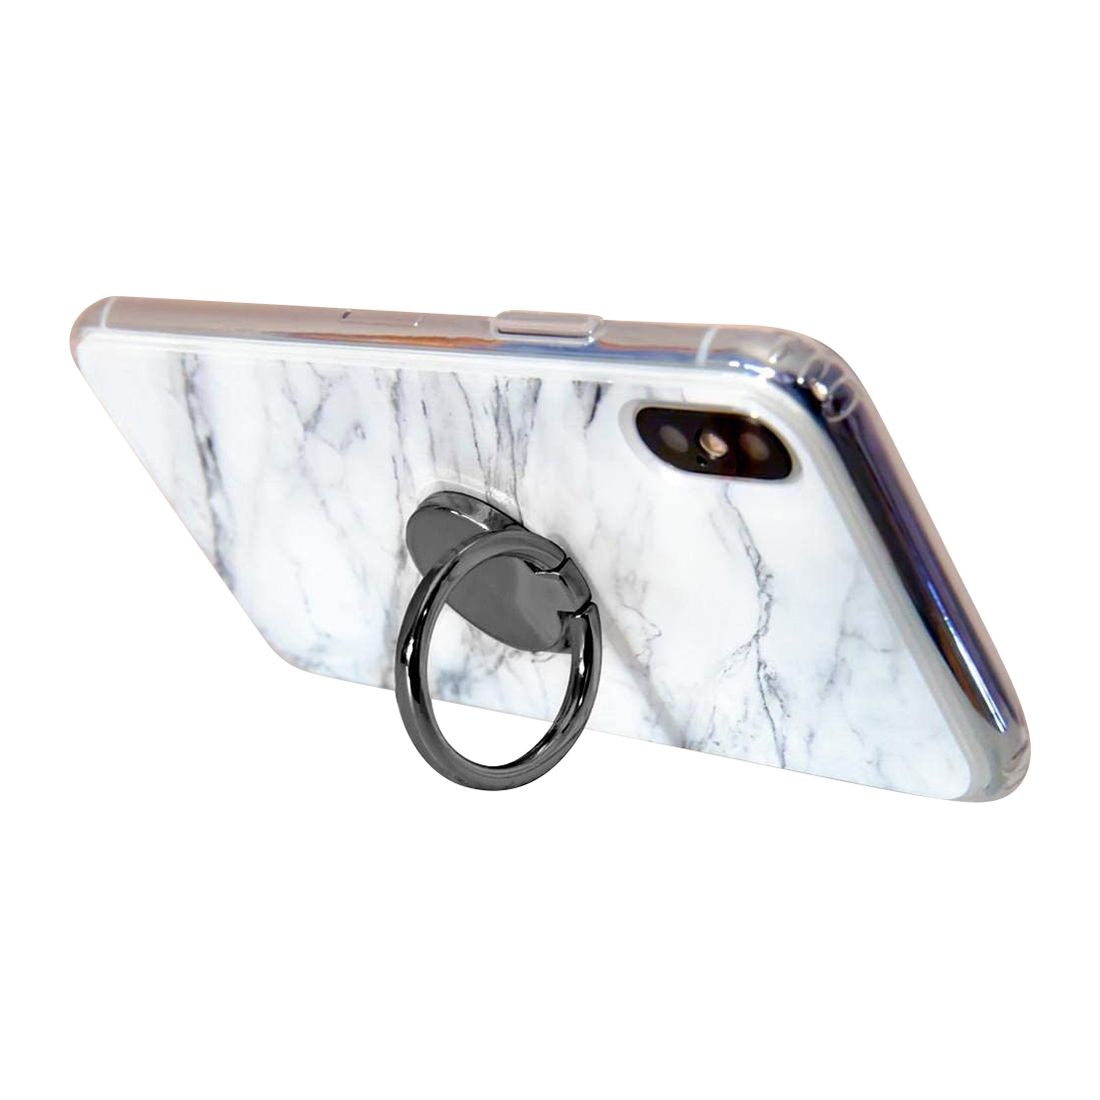 Casery Gun Metal Mobile Phone Ring/Stand